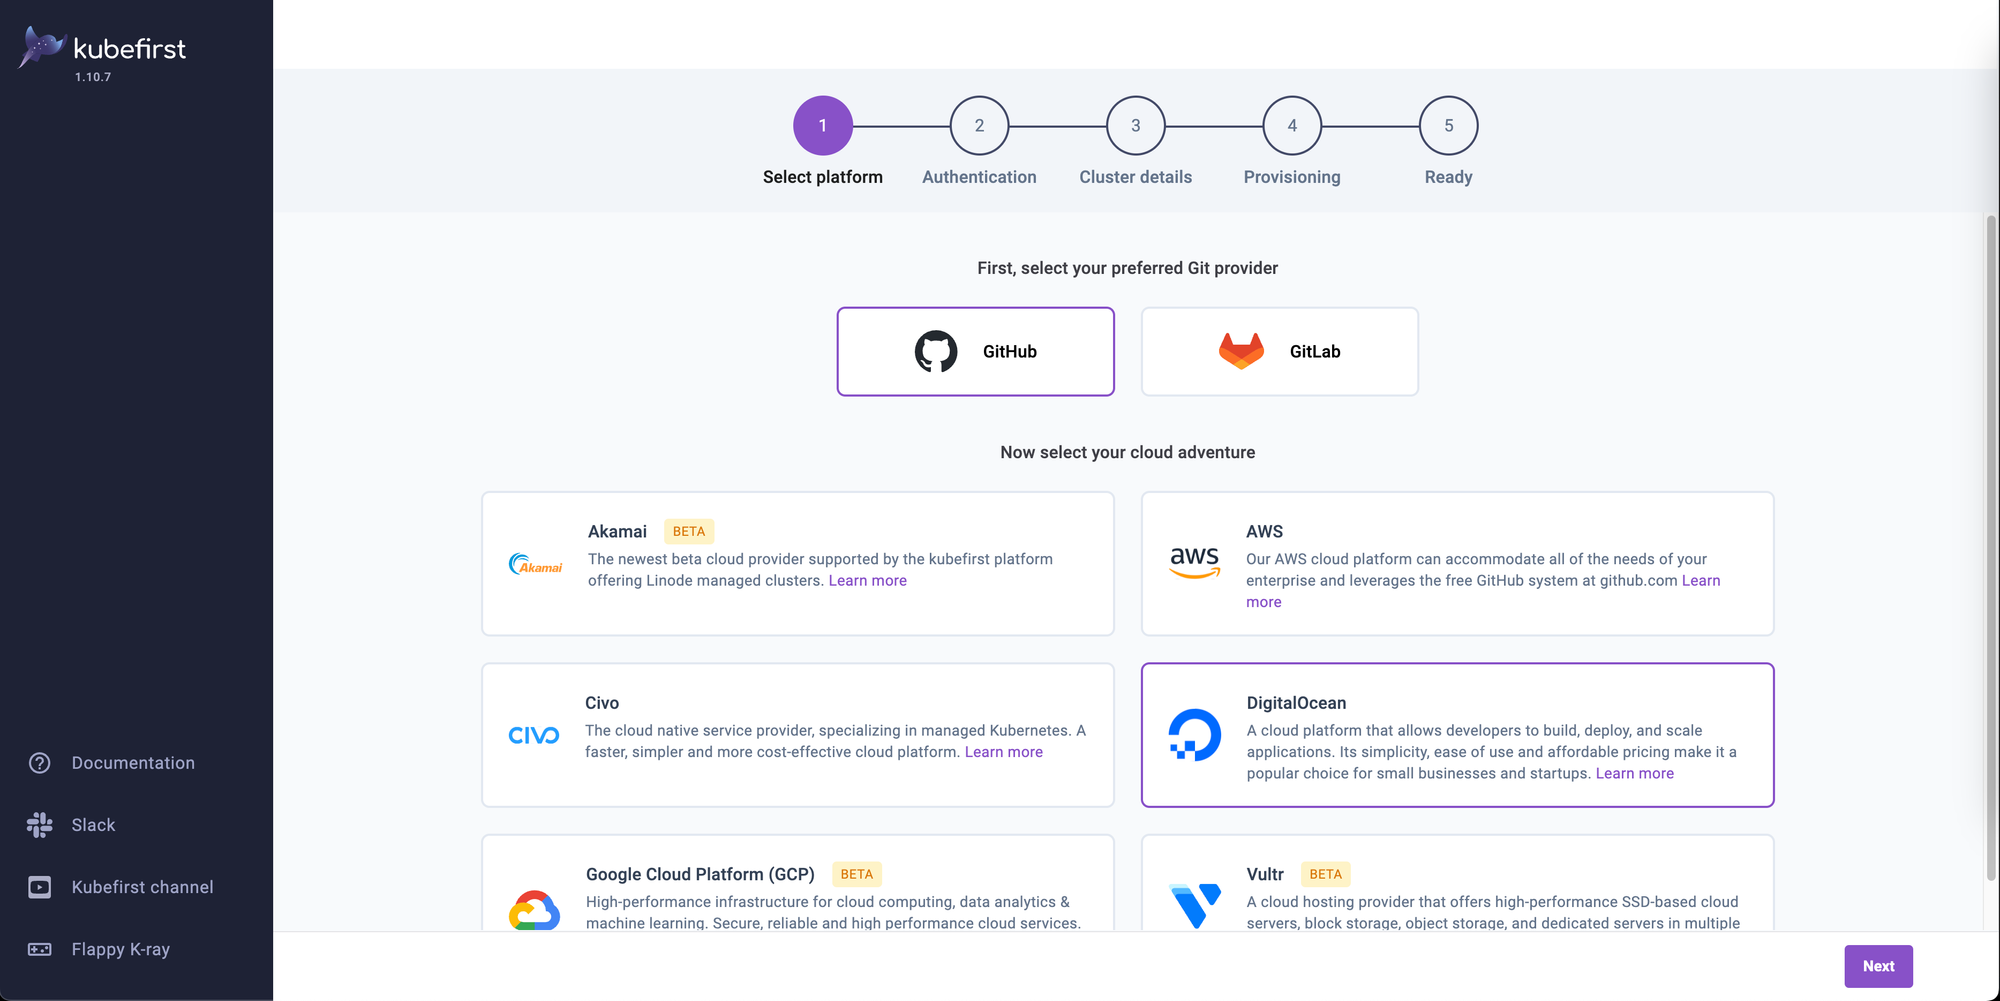 The Console UI displaying the first step for creating a new cluster, showcasing the choice between GitHub or GitLab for your Git provider, and AWS, Civo, DigitalOcean, Google Cloud, and Vultr for public clouds.